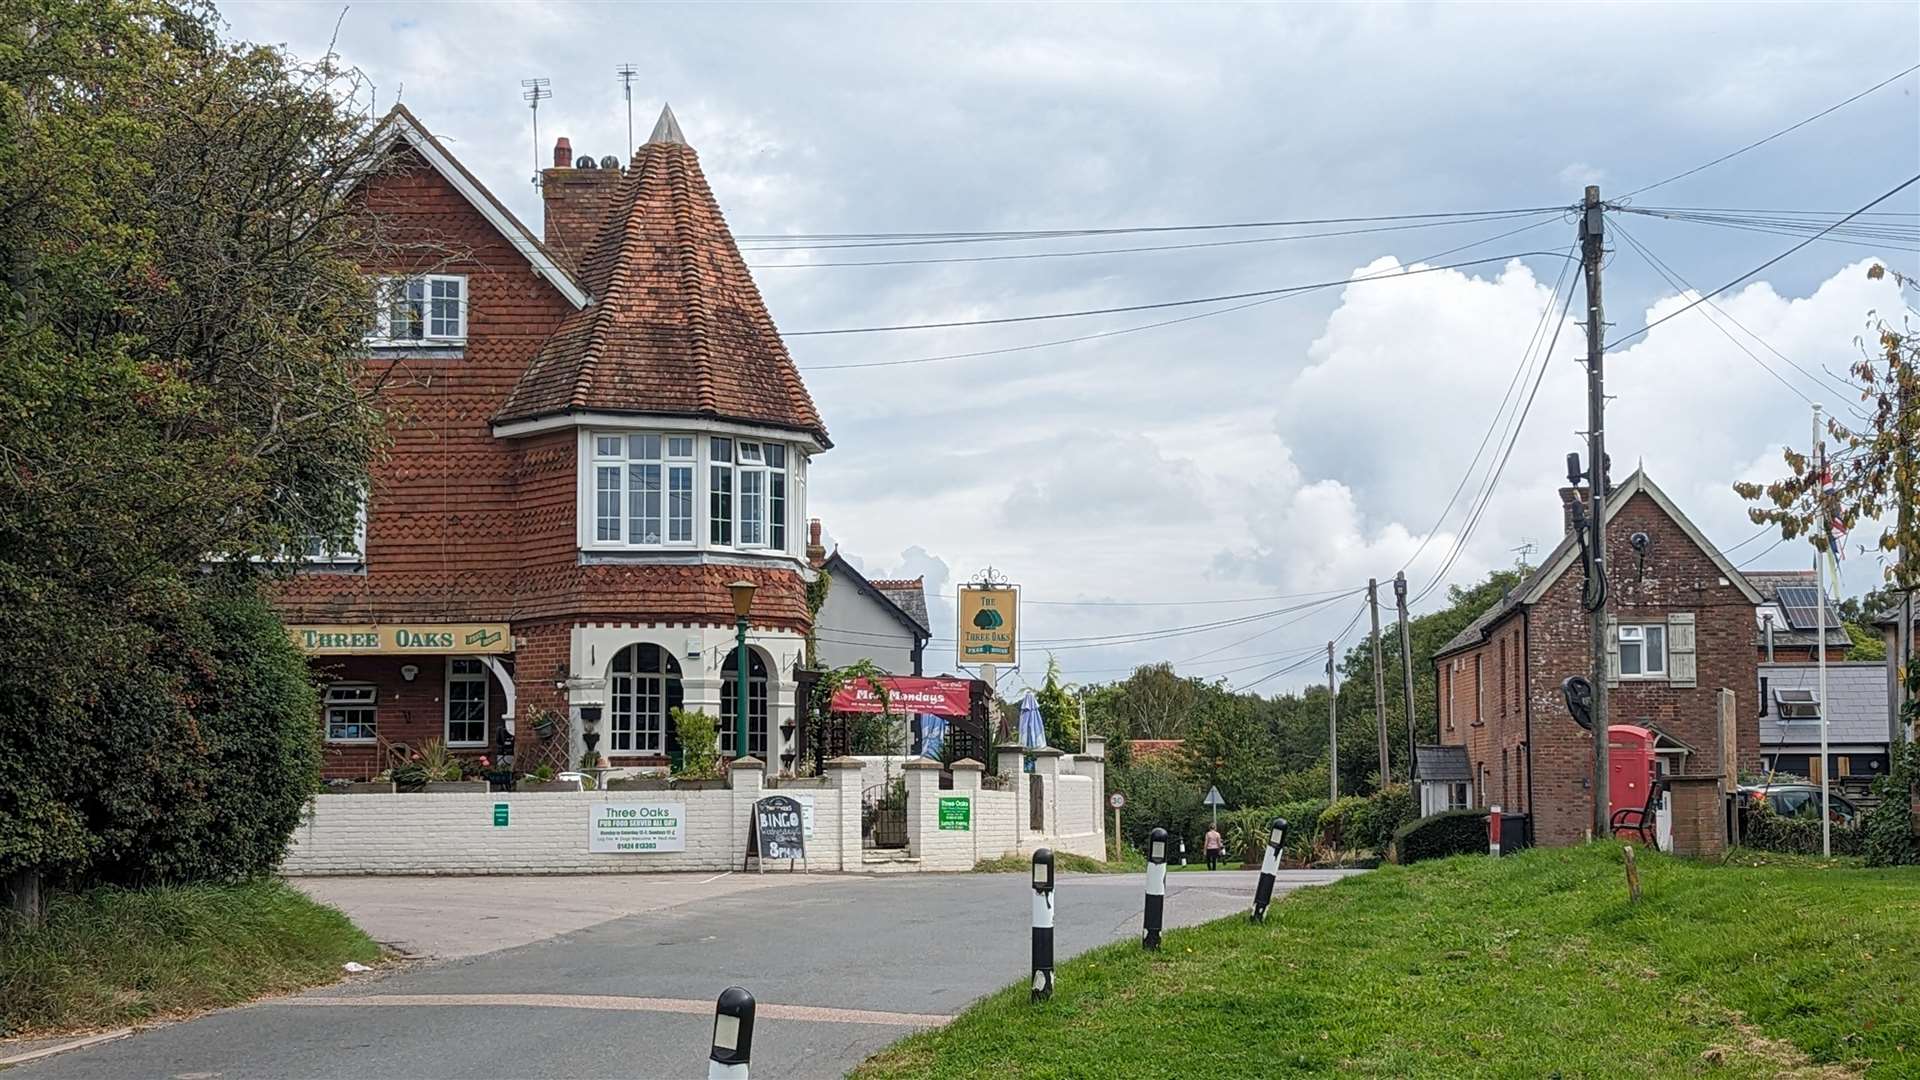 The Three Oaks pub is just a short work from the station of the same name